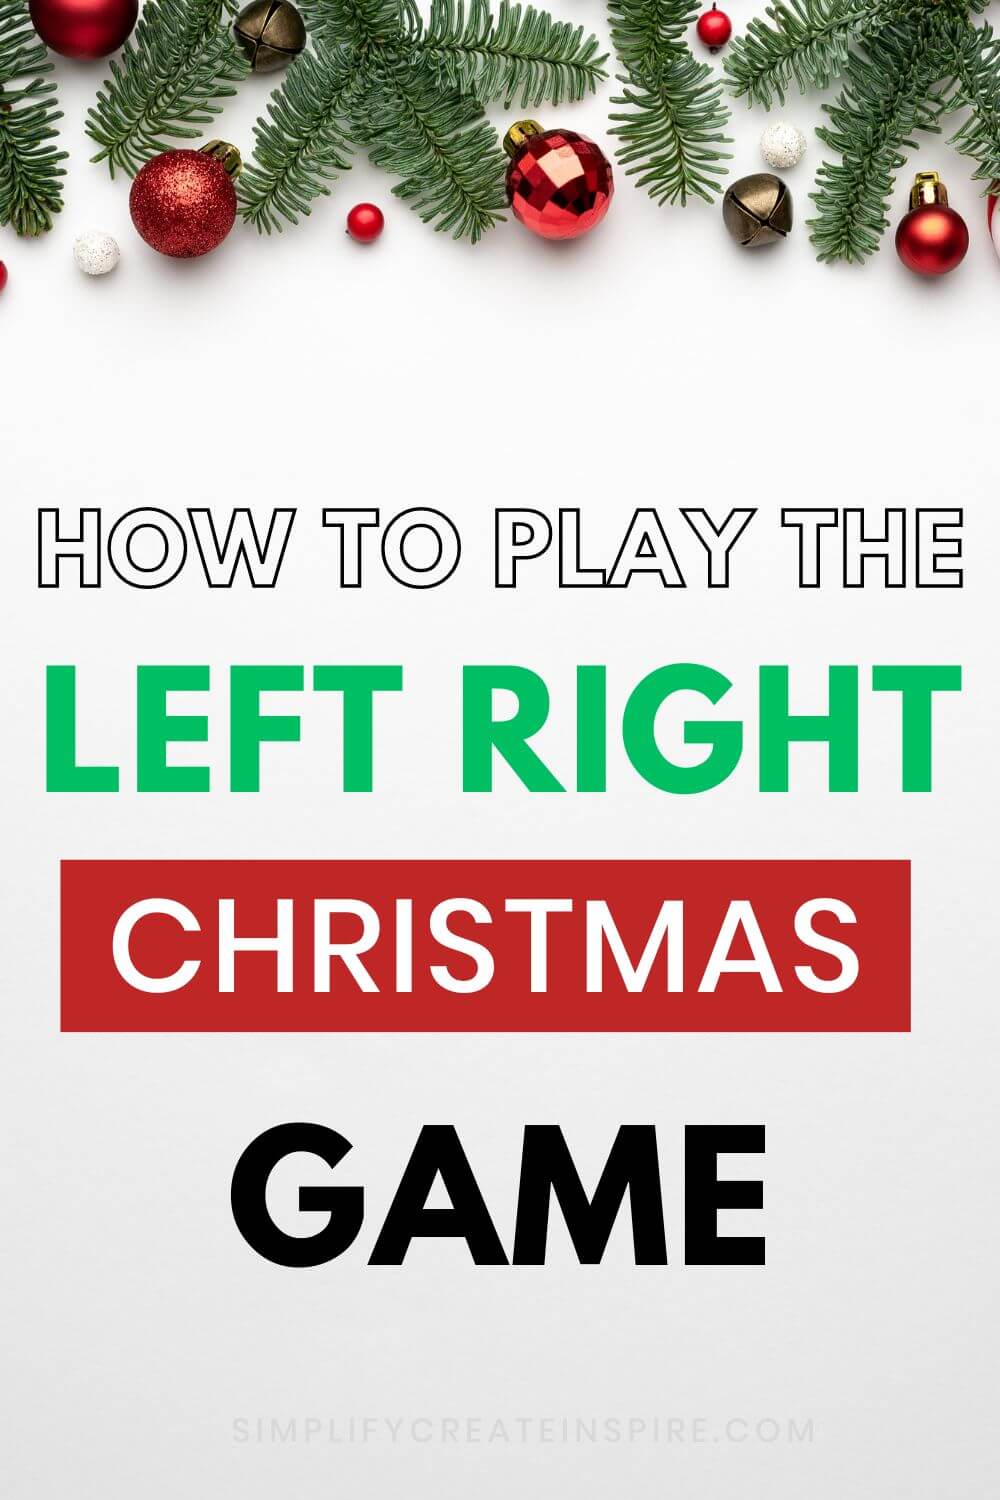 How to play the left right christmas game.